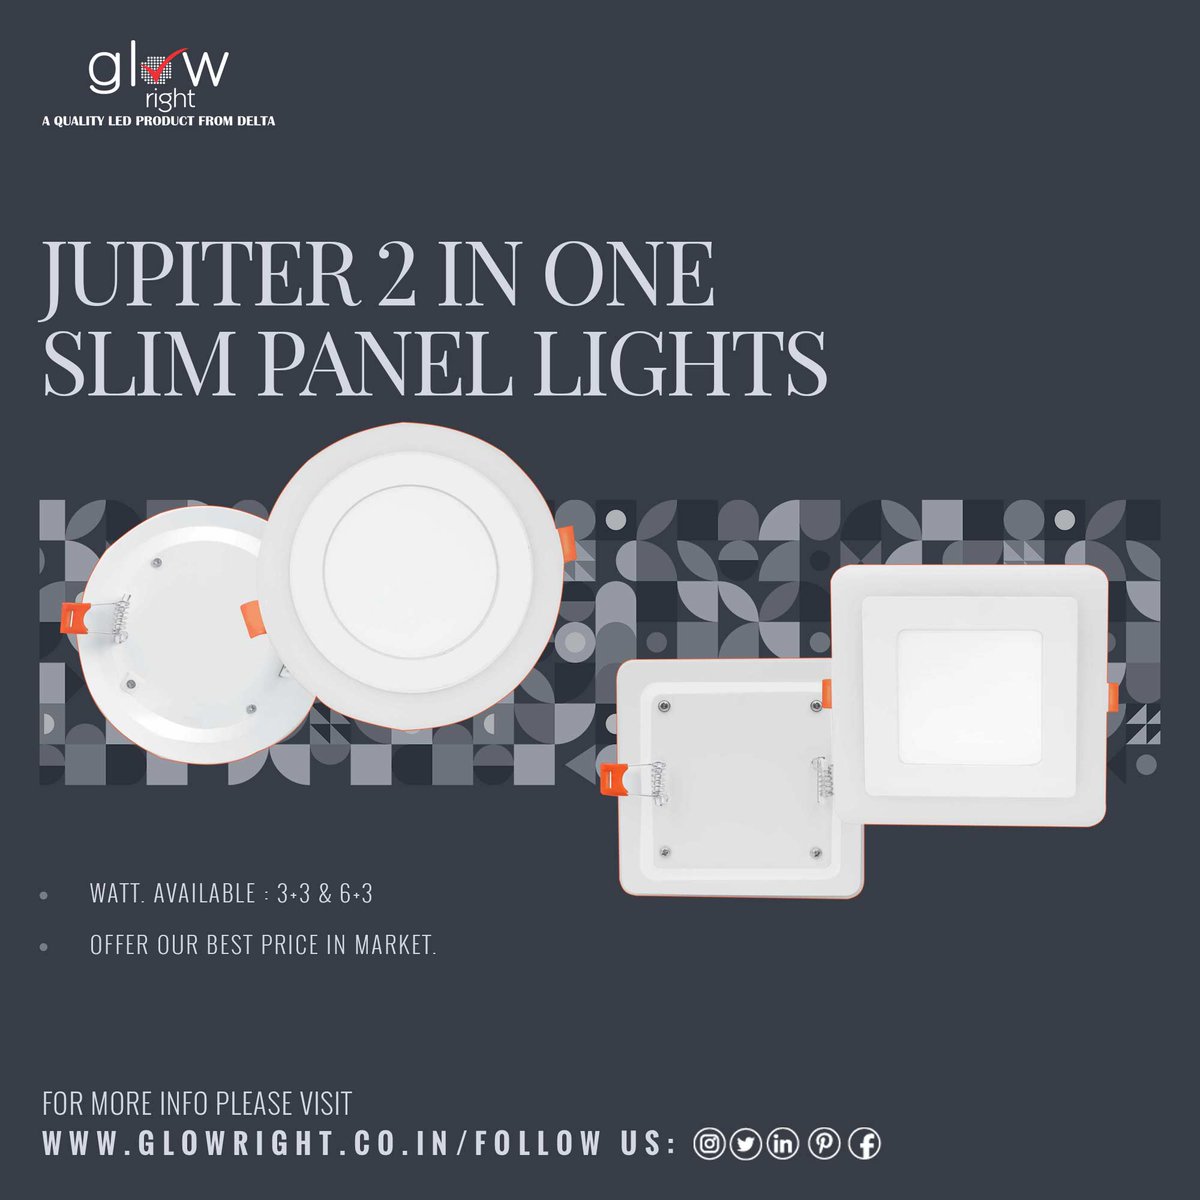 With the illumination of Glowright LED Surface Panel Lights, every corner of your home will remain bright! Go ahead and beautify your home today.

#glowright #SurfacePanels #LEDLighting #IlluminateSpaces #ModernLighting #EcoFriendly #EnergyEfficient #EfficientLighting